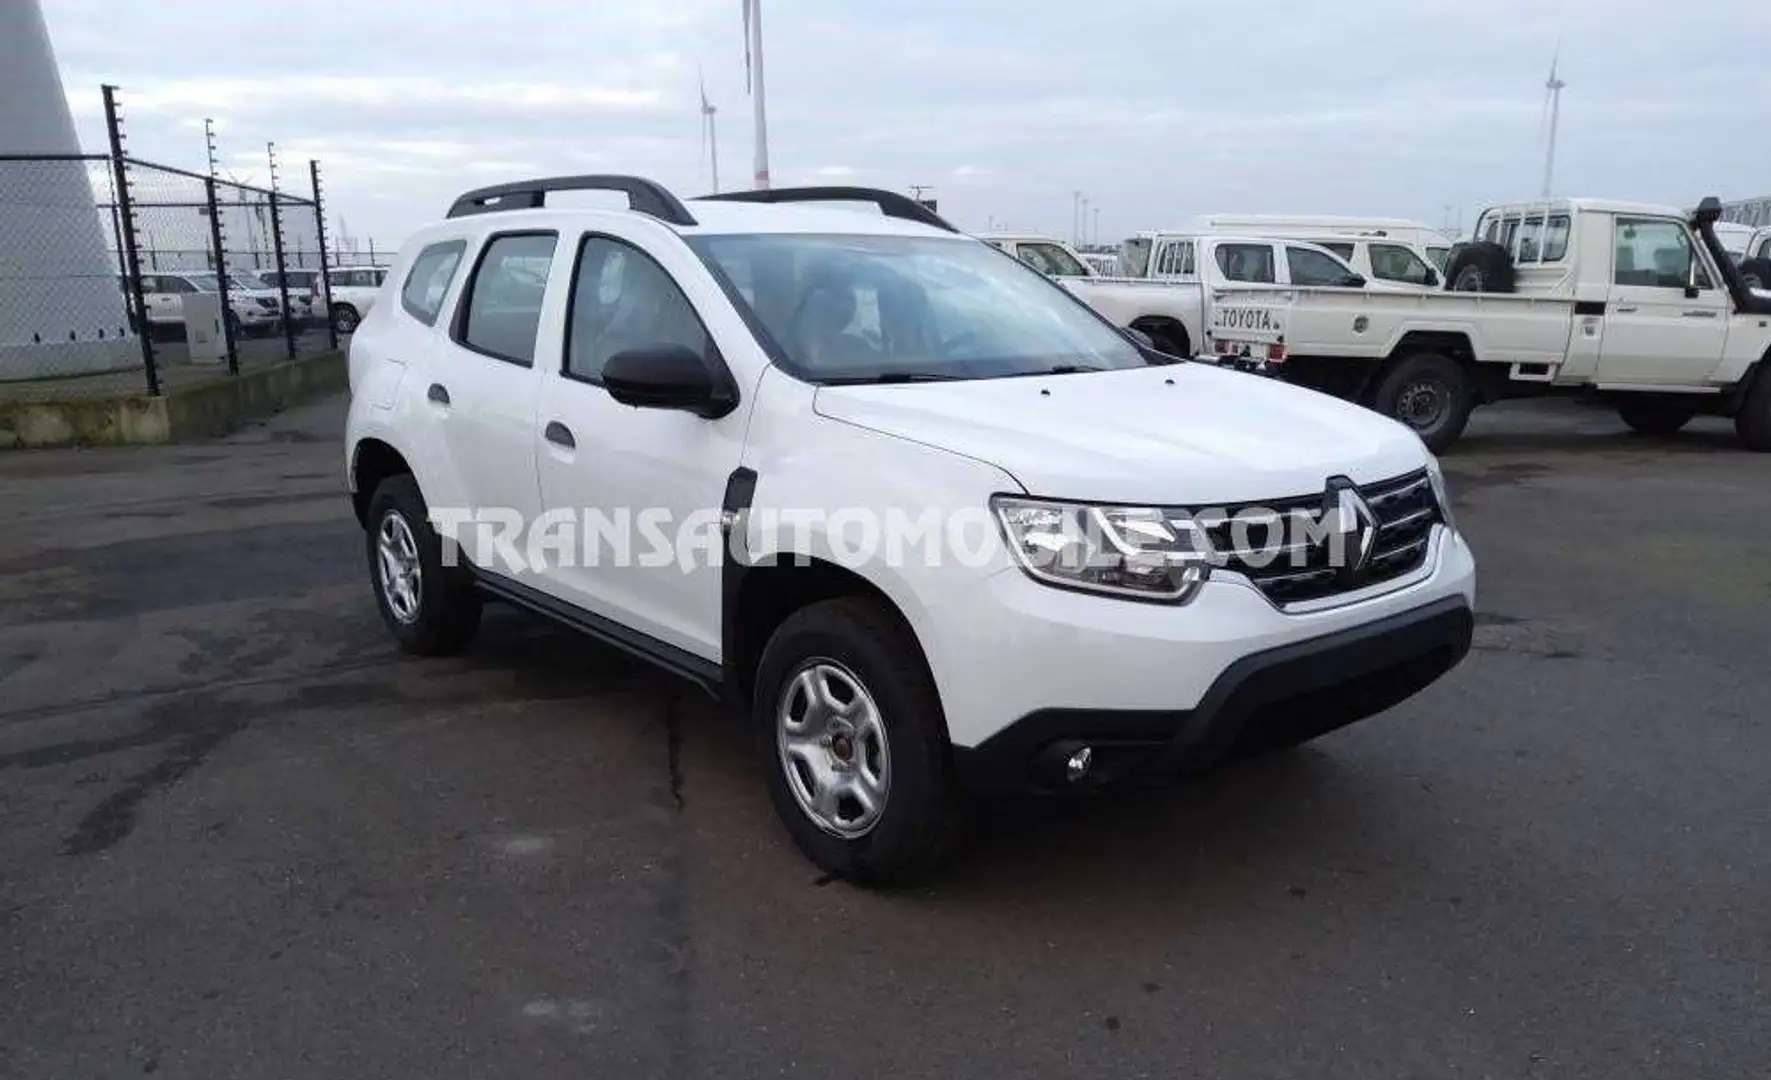 Renault Duster Standard - EXPORT OUT EU TROPICAL VERSION - EXPORT White - 1